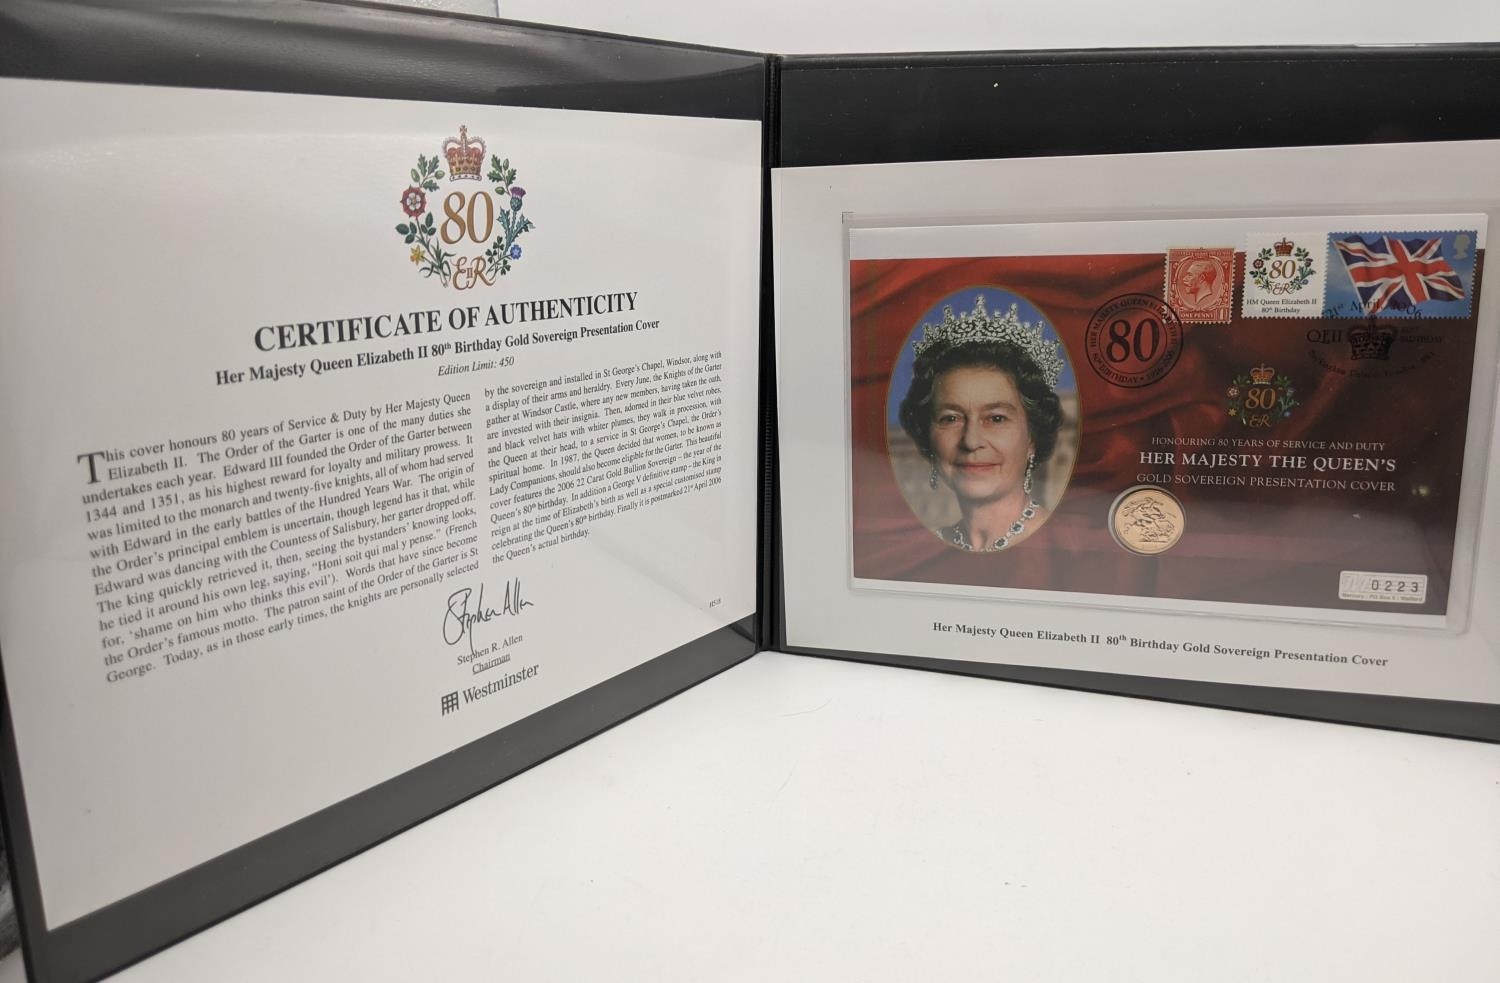 United Kingdom - Elizabeth II (1952-2022), sovereign dated 2006, housed in the 2006 H.M. Queen